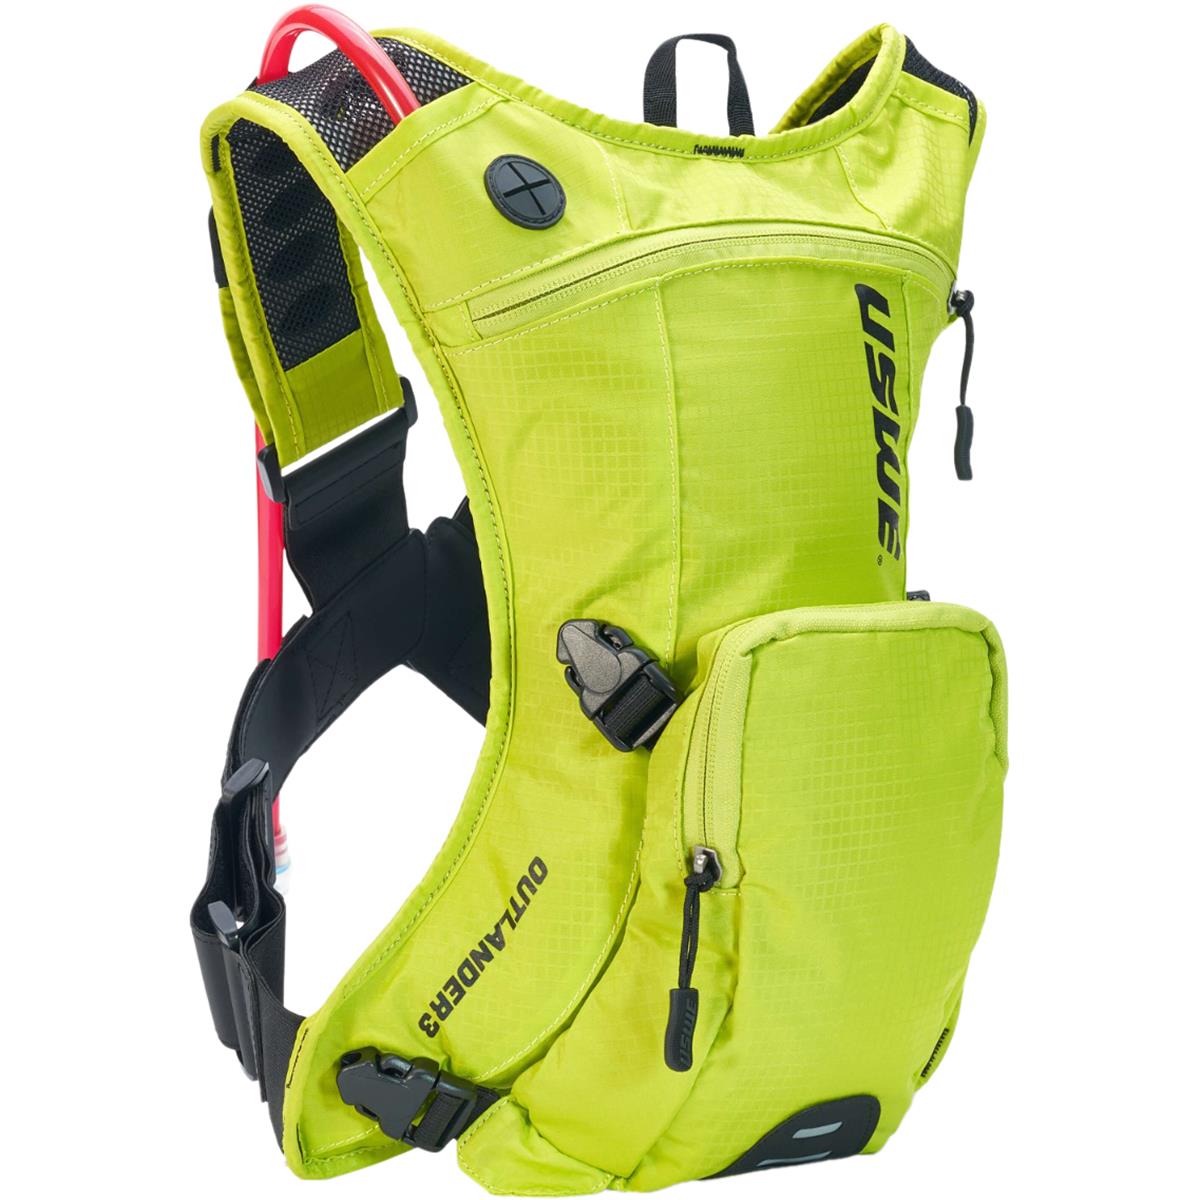 USWE Hydration Pack Outlander 3 Yellow